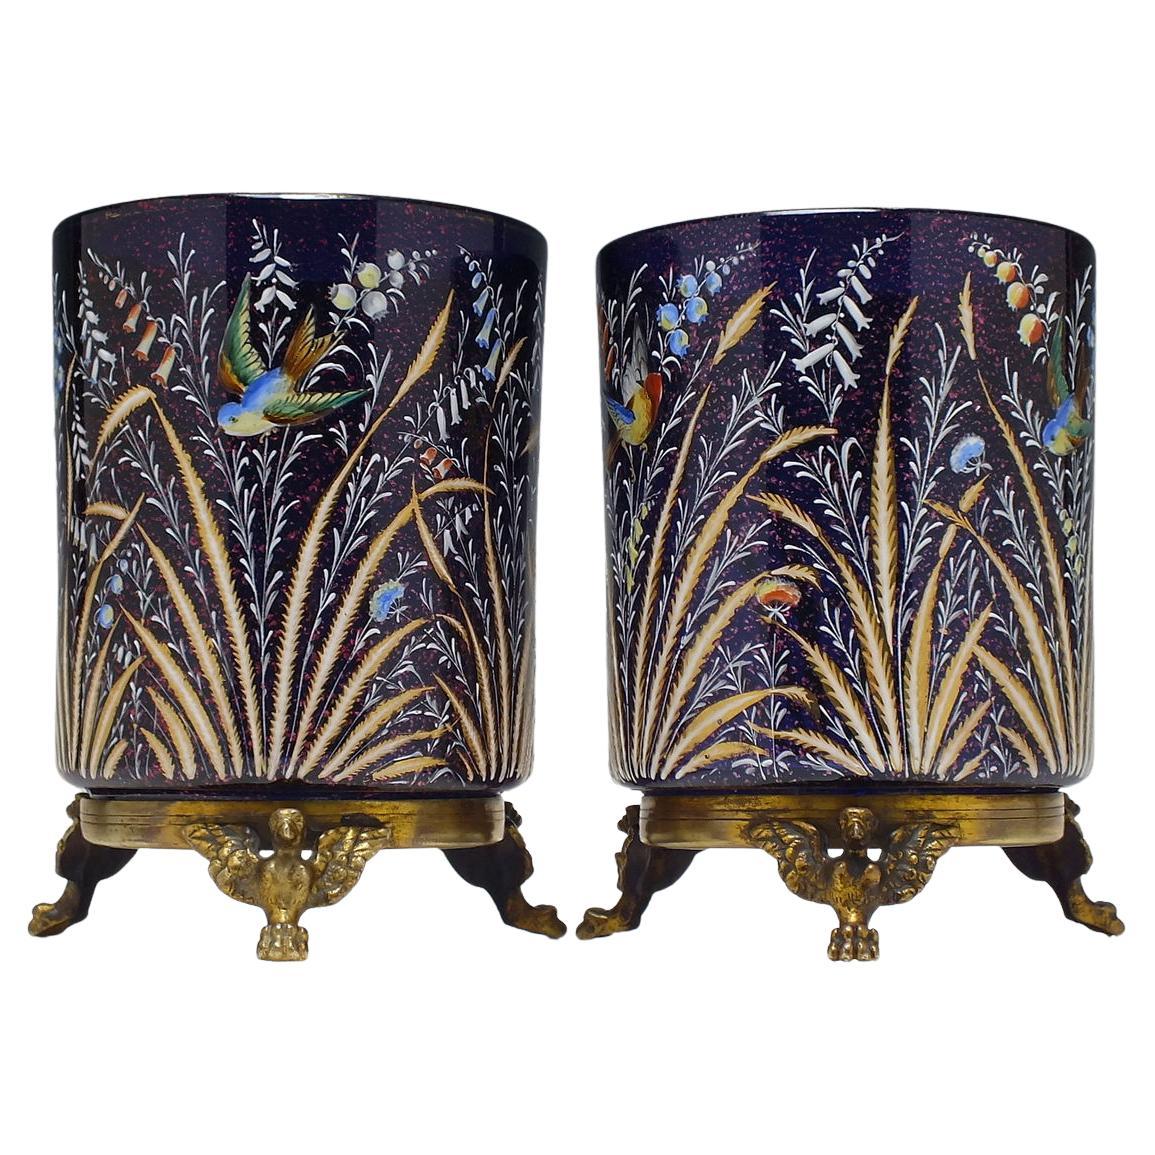 Pair of Museum Quality Moser Polychromatic Enamelled 19th Century Vases c1890 For Sale